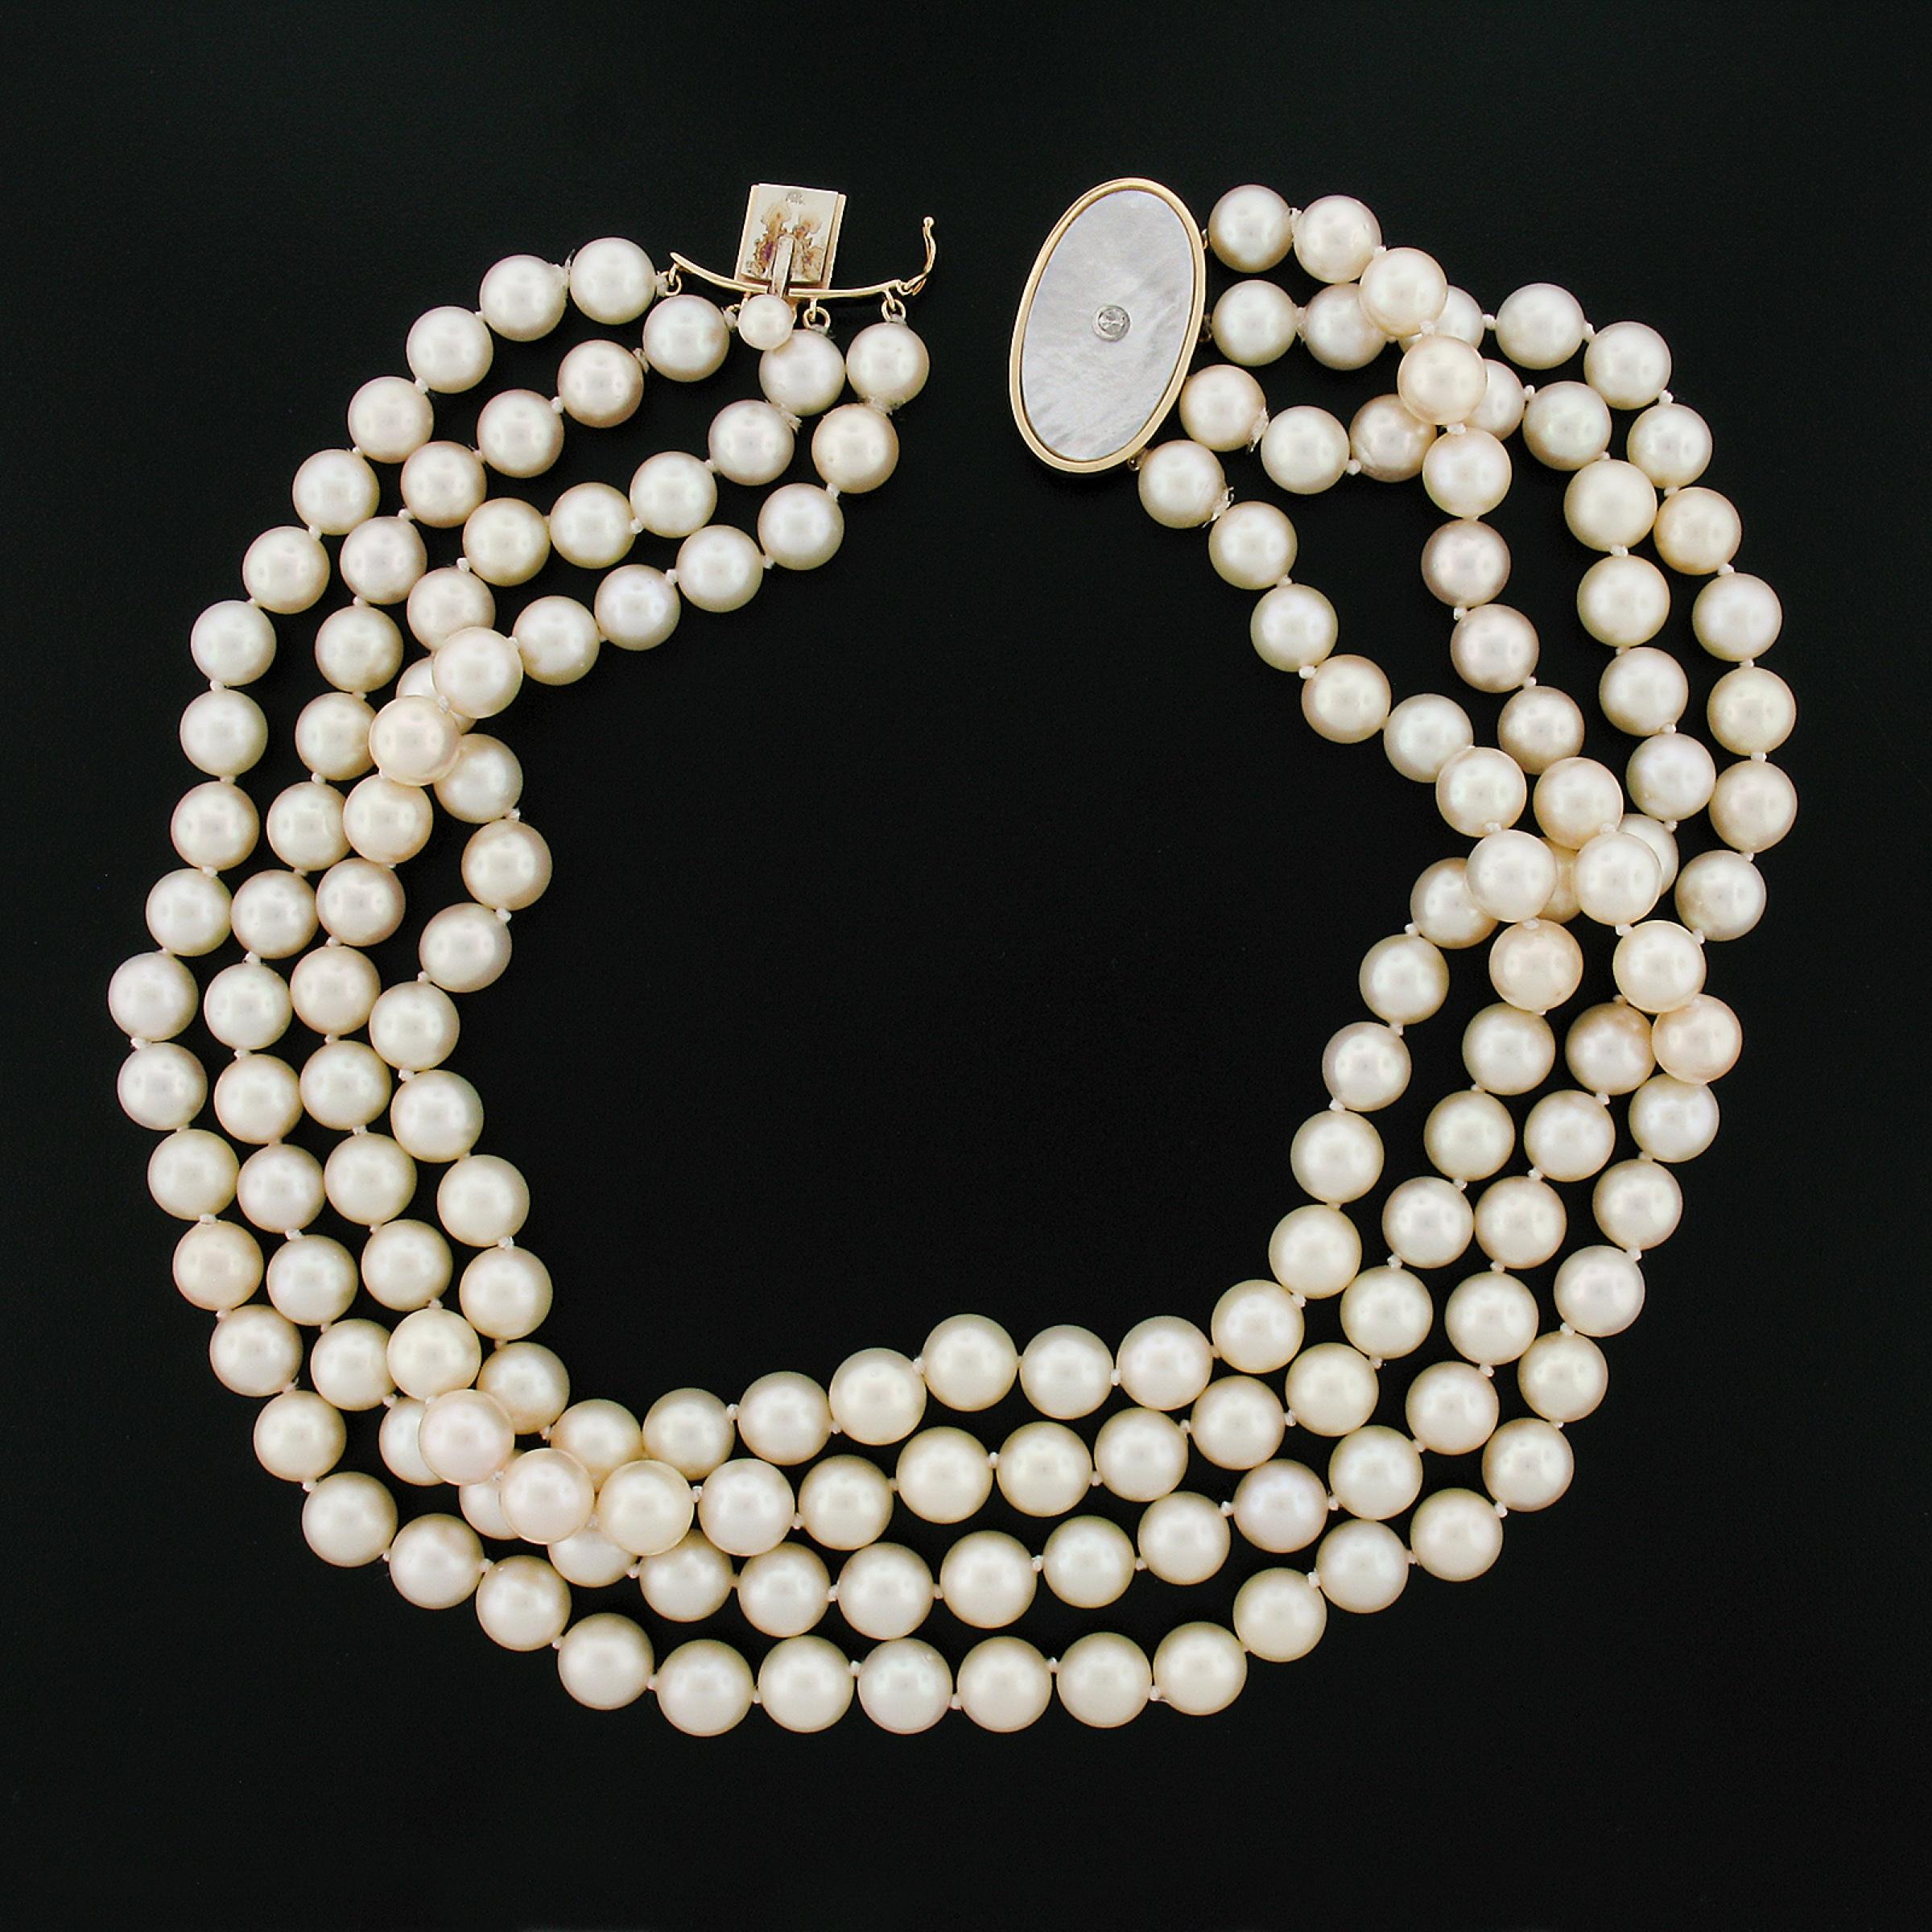 Vintage Tambetti Layered Graduated 4 Strand Pearl Necklace 14k Gold Fancy Clasp In Excellent Condition For Sale In Montclair, NJ